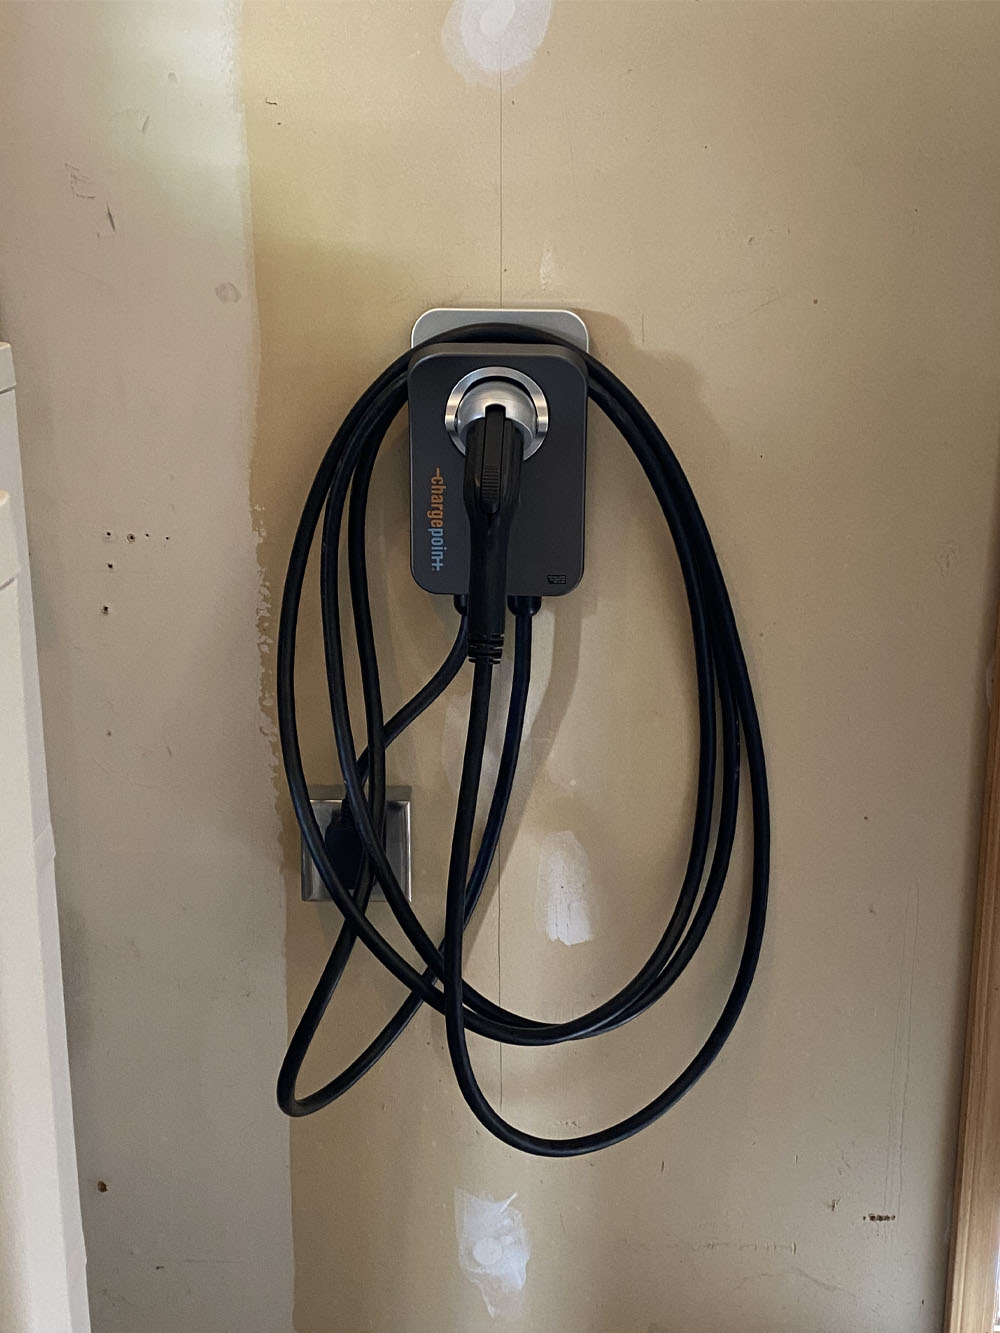 Enel X WAY JuiceBox ev charger install